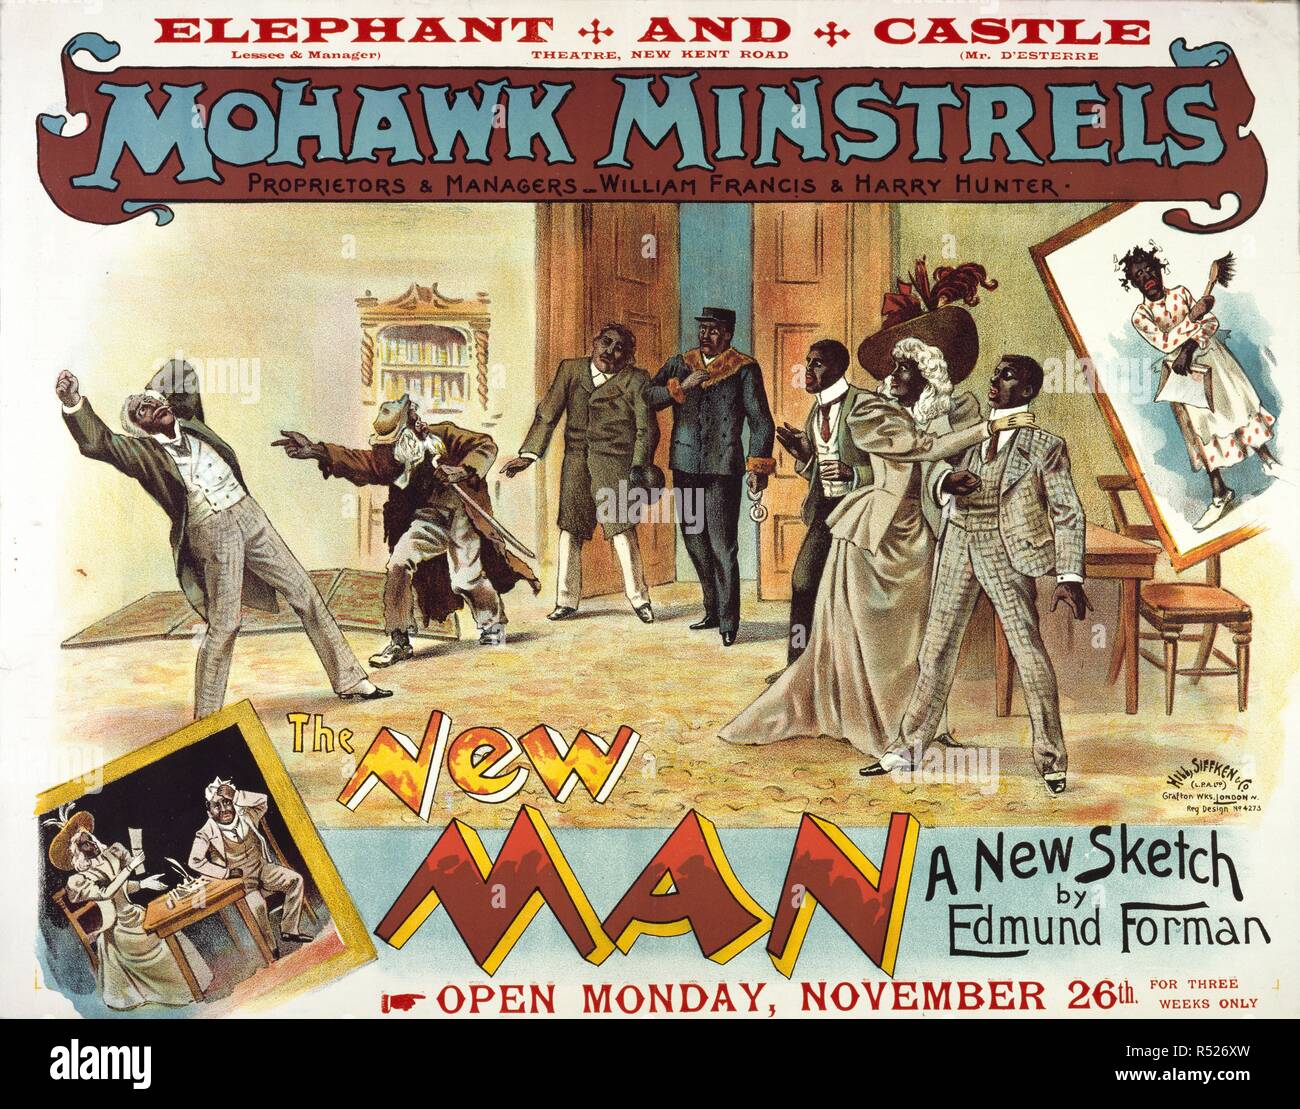 Elephant and Castle Theatre, Southwark. 'The New Man', 1888. 'The Mohawk Minstrels - The new man'. A collection of pamphlets, handbills, and miscellaneous printed matter relating to Victorian entertainment and everyday life. Hill, Siffken & Co. (L.P.A. Ltd.) Grafton Wks, London N. 1888. Source: Evan.264. Author: Evanion, Henry. Stock Photo